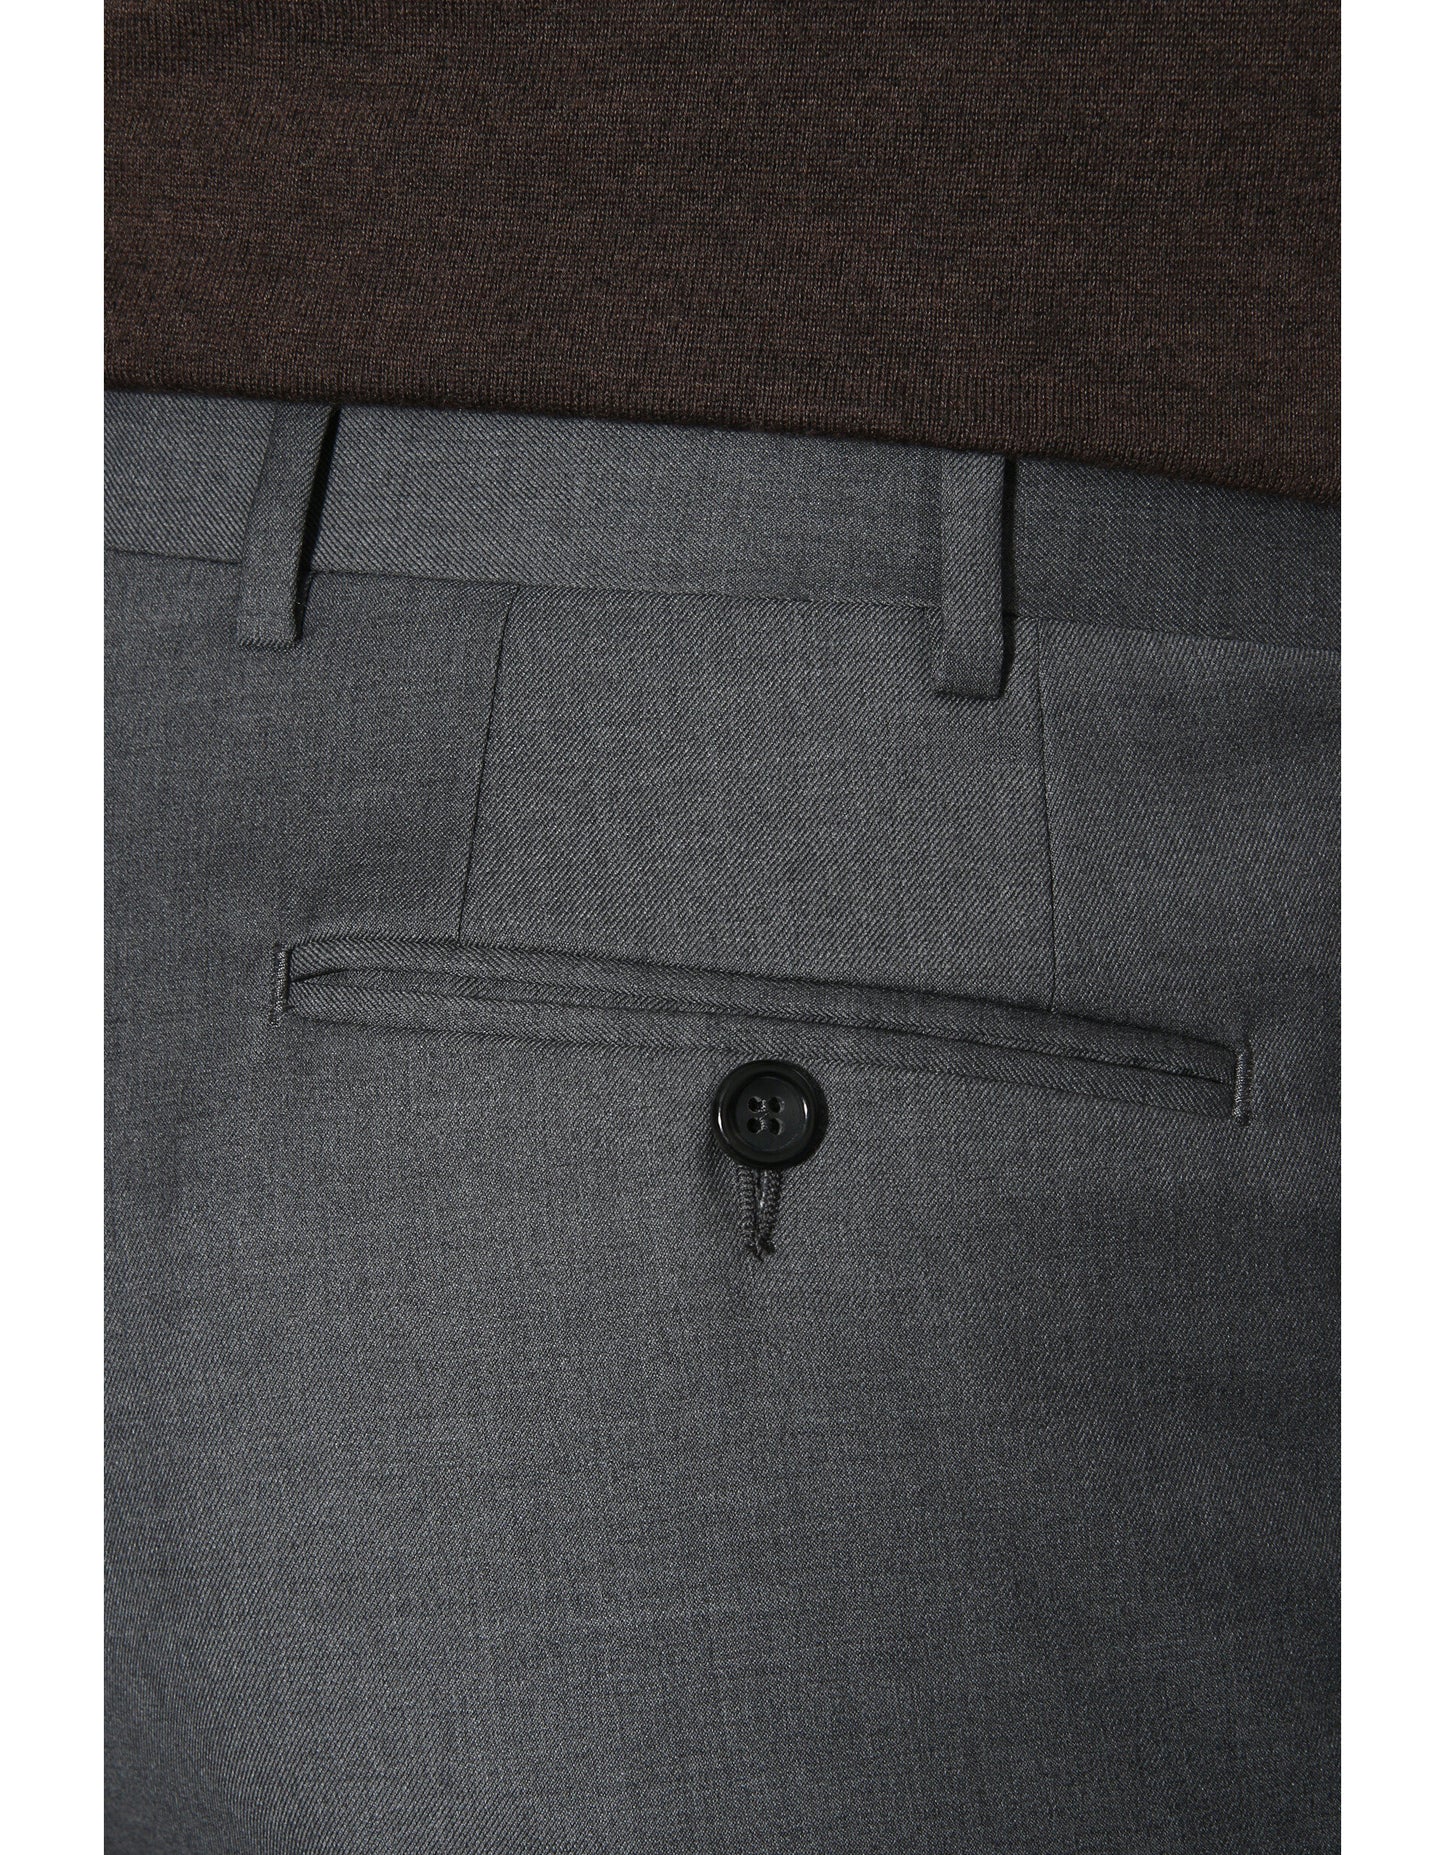 Canali Siena Classic Fit, Super 130's Wool Dress Pants in Charcoal Gray